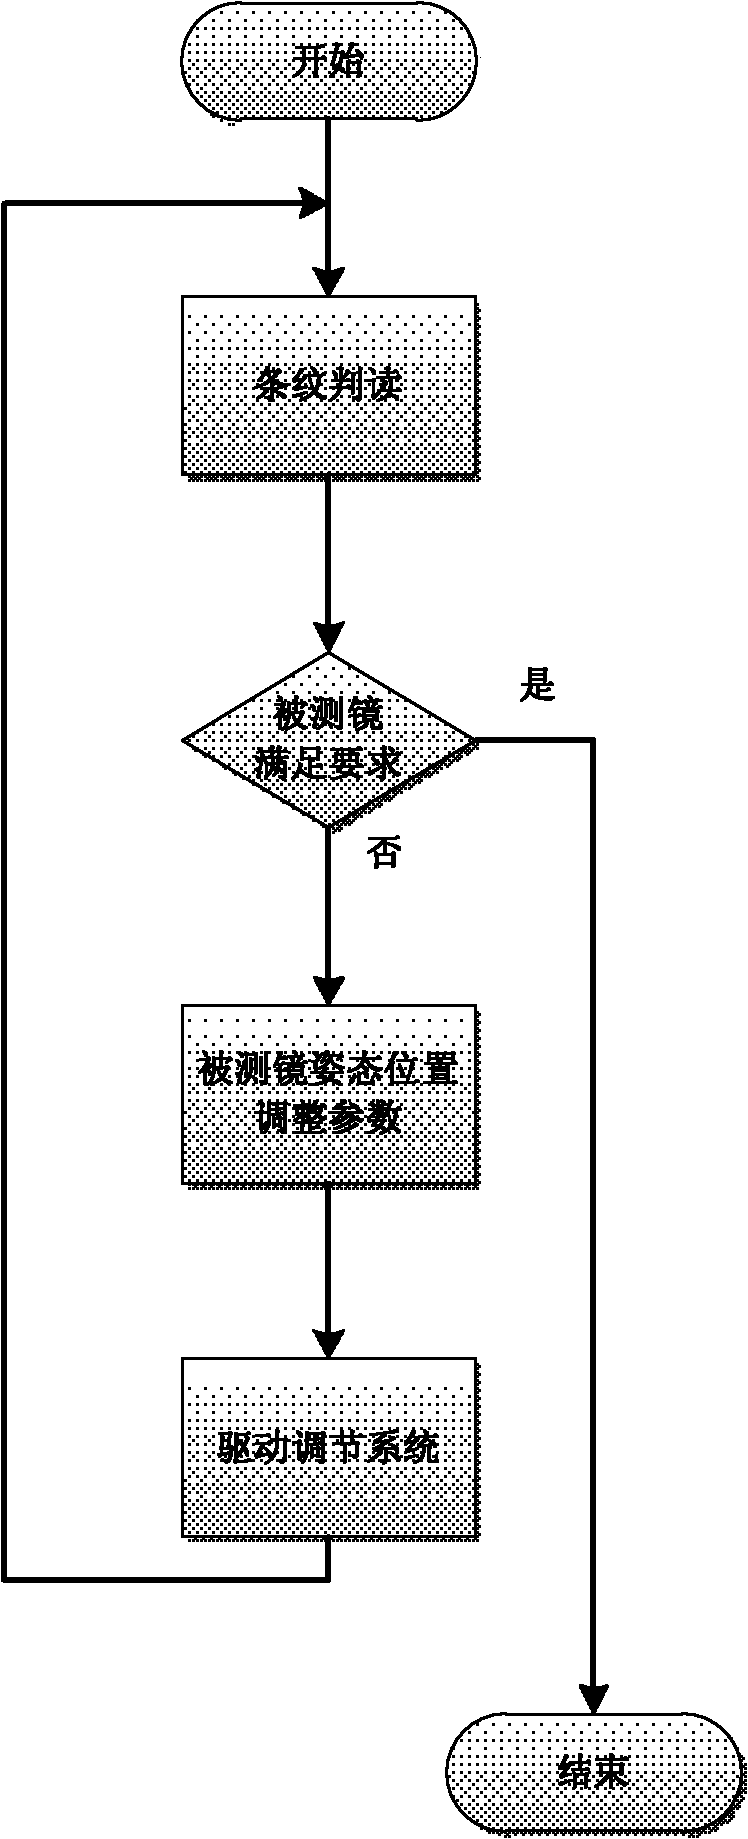 Method for quickly and automatically adjusting tested element detected by using Fizeau interferometer